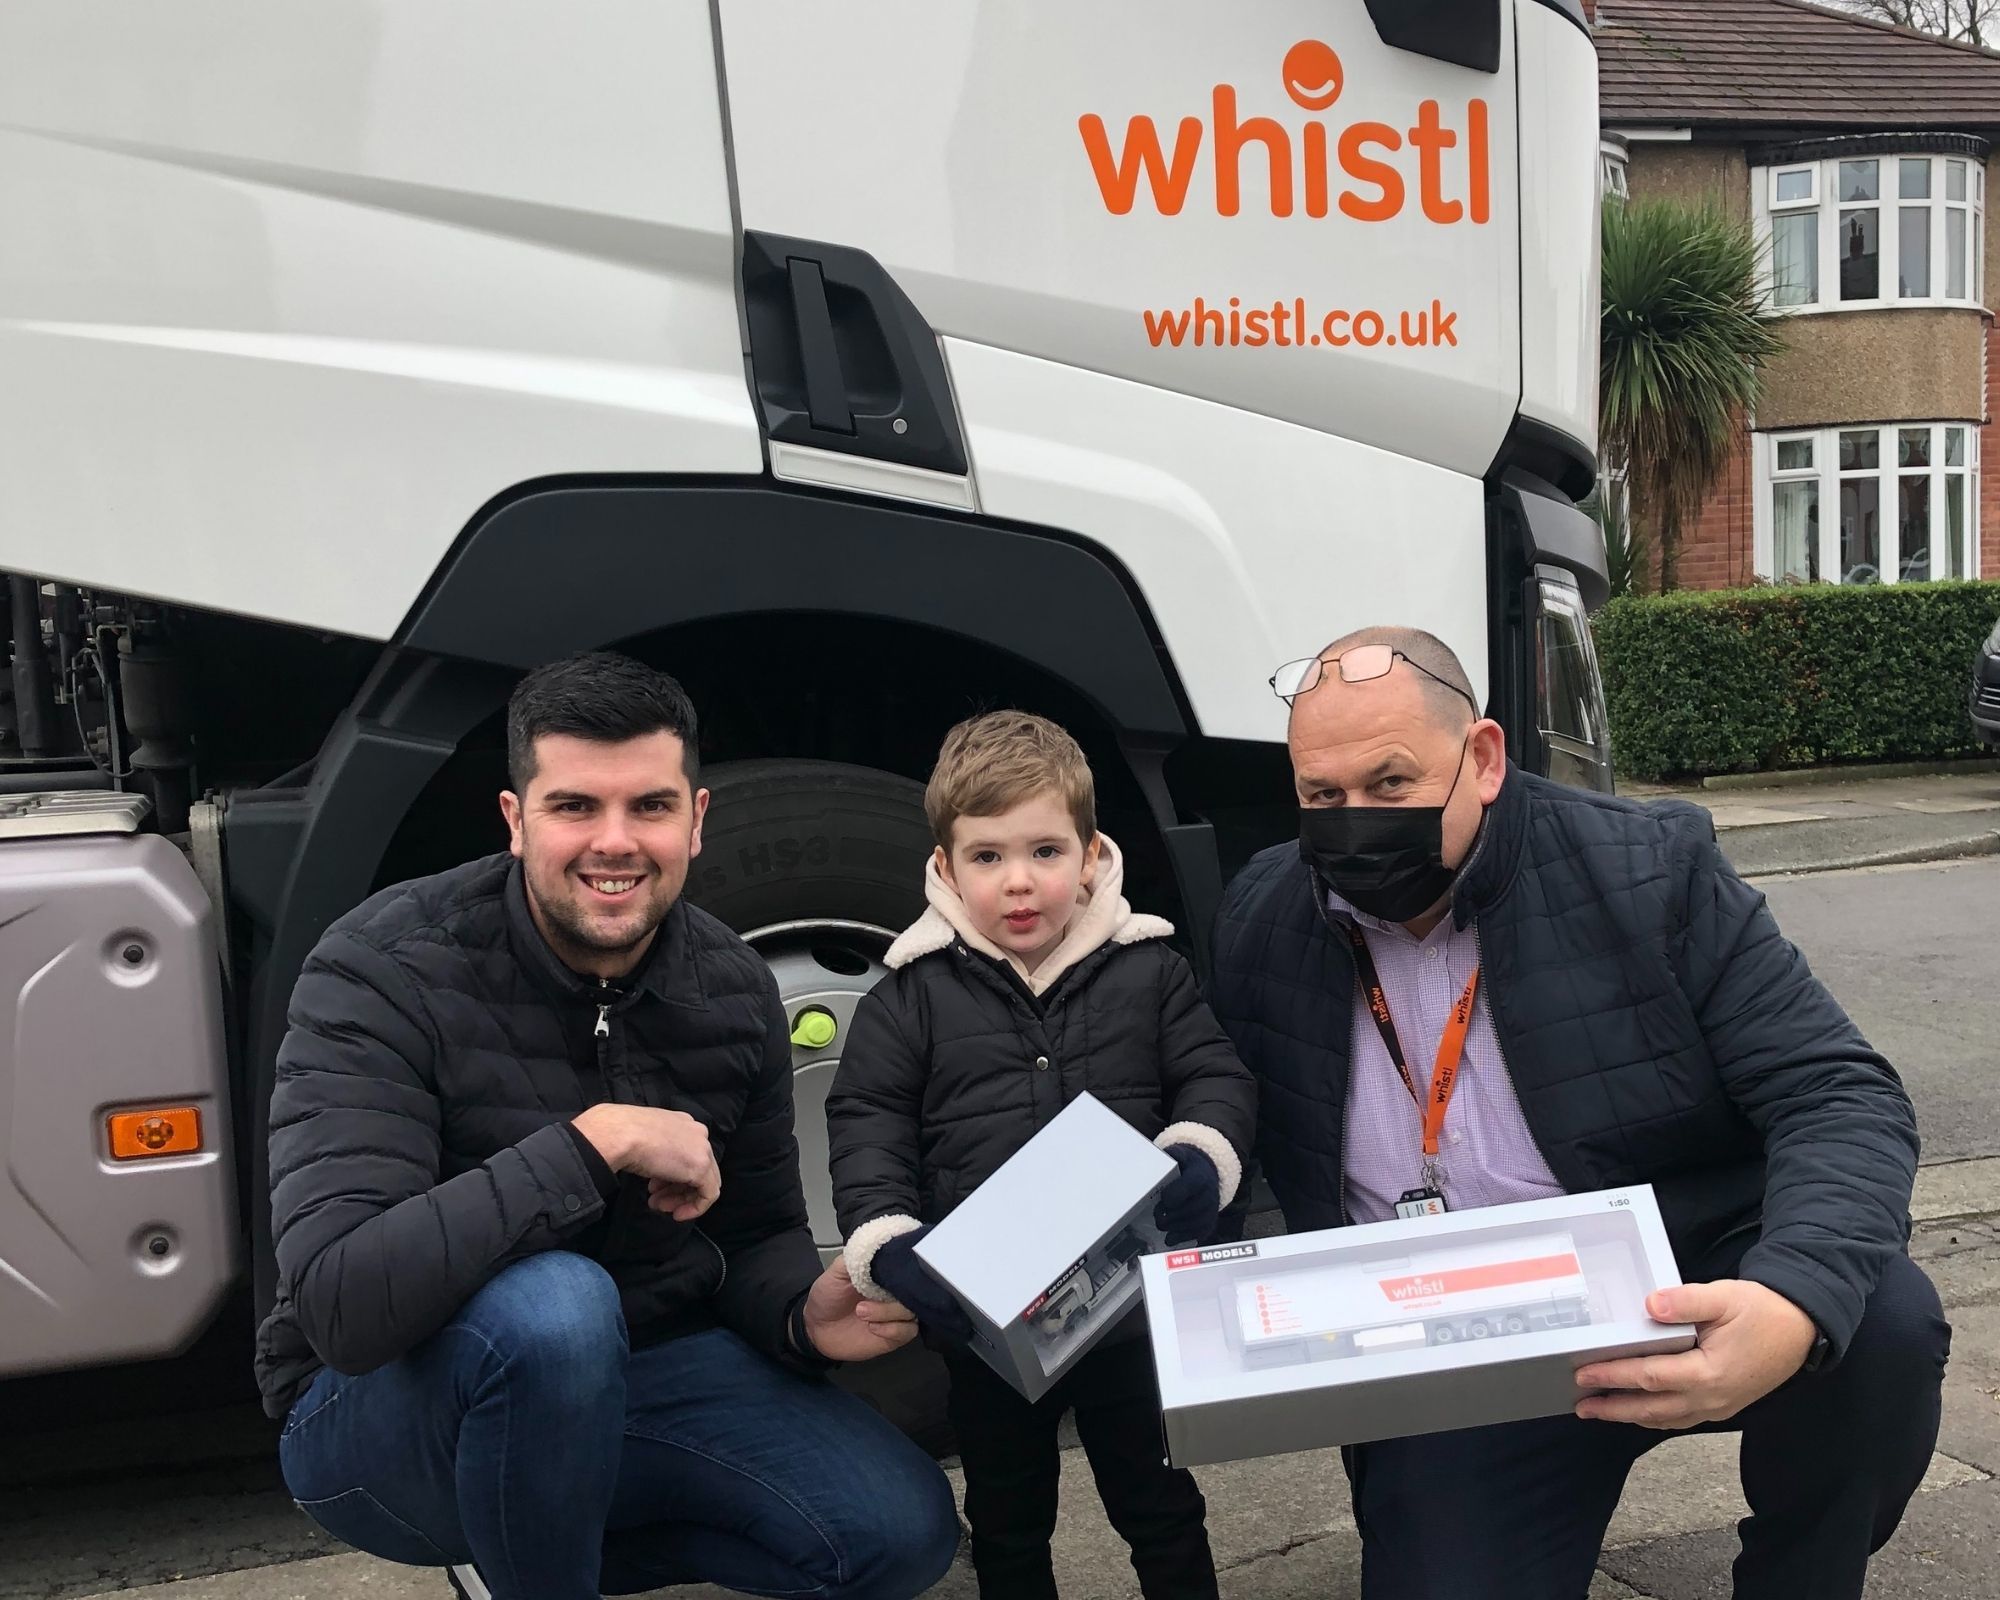 Christmas comes early with Bolton boys incredible Whistl lorry delivery